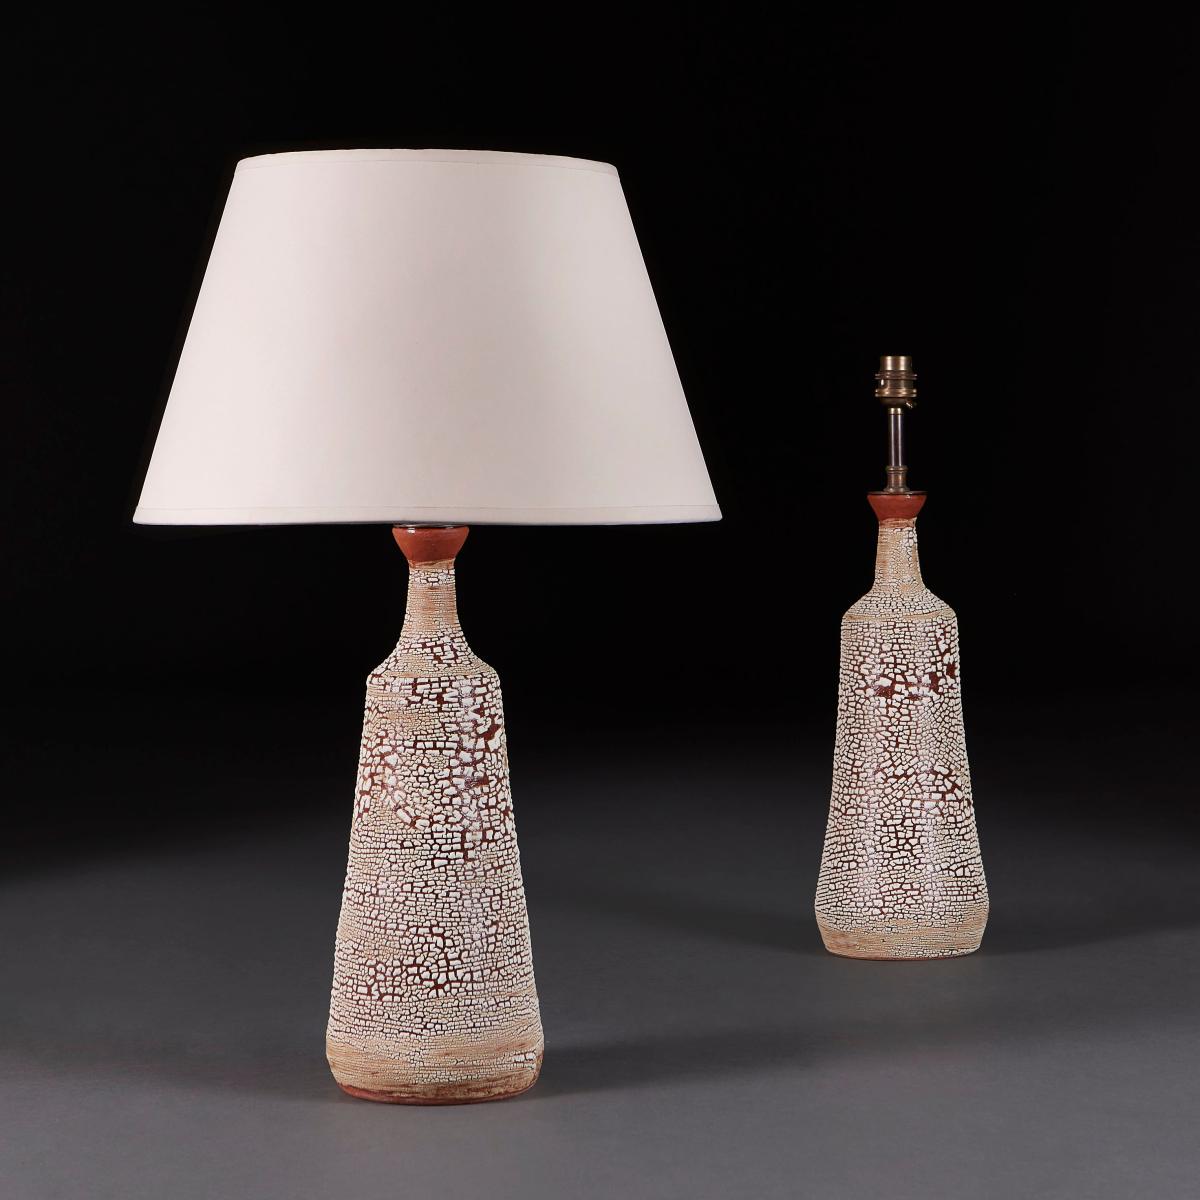 A Pair of Terracotta Art Pottery Lamps